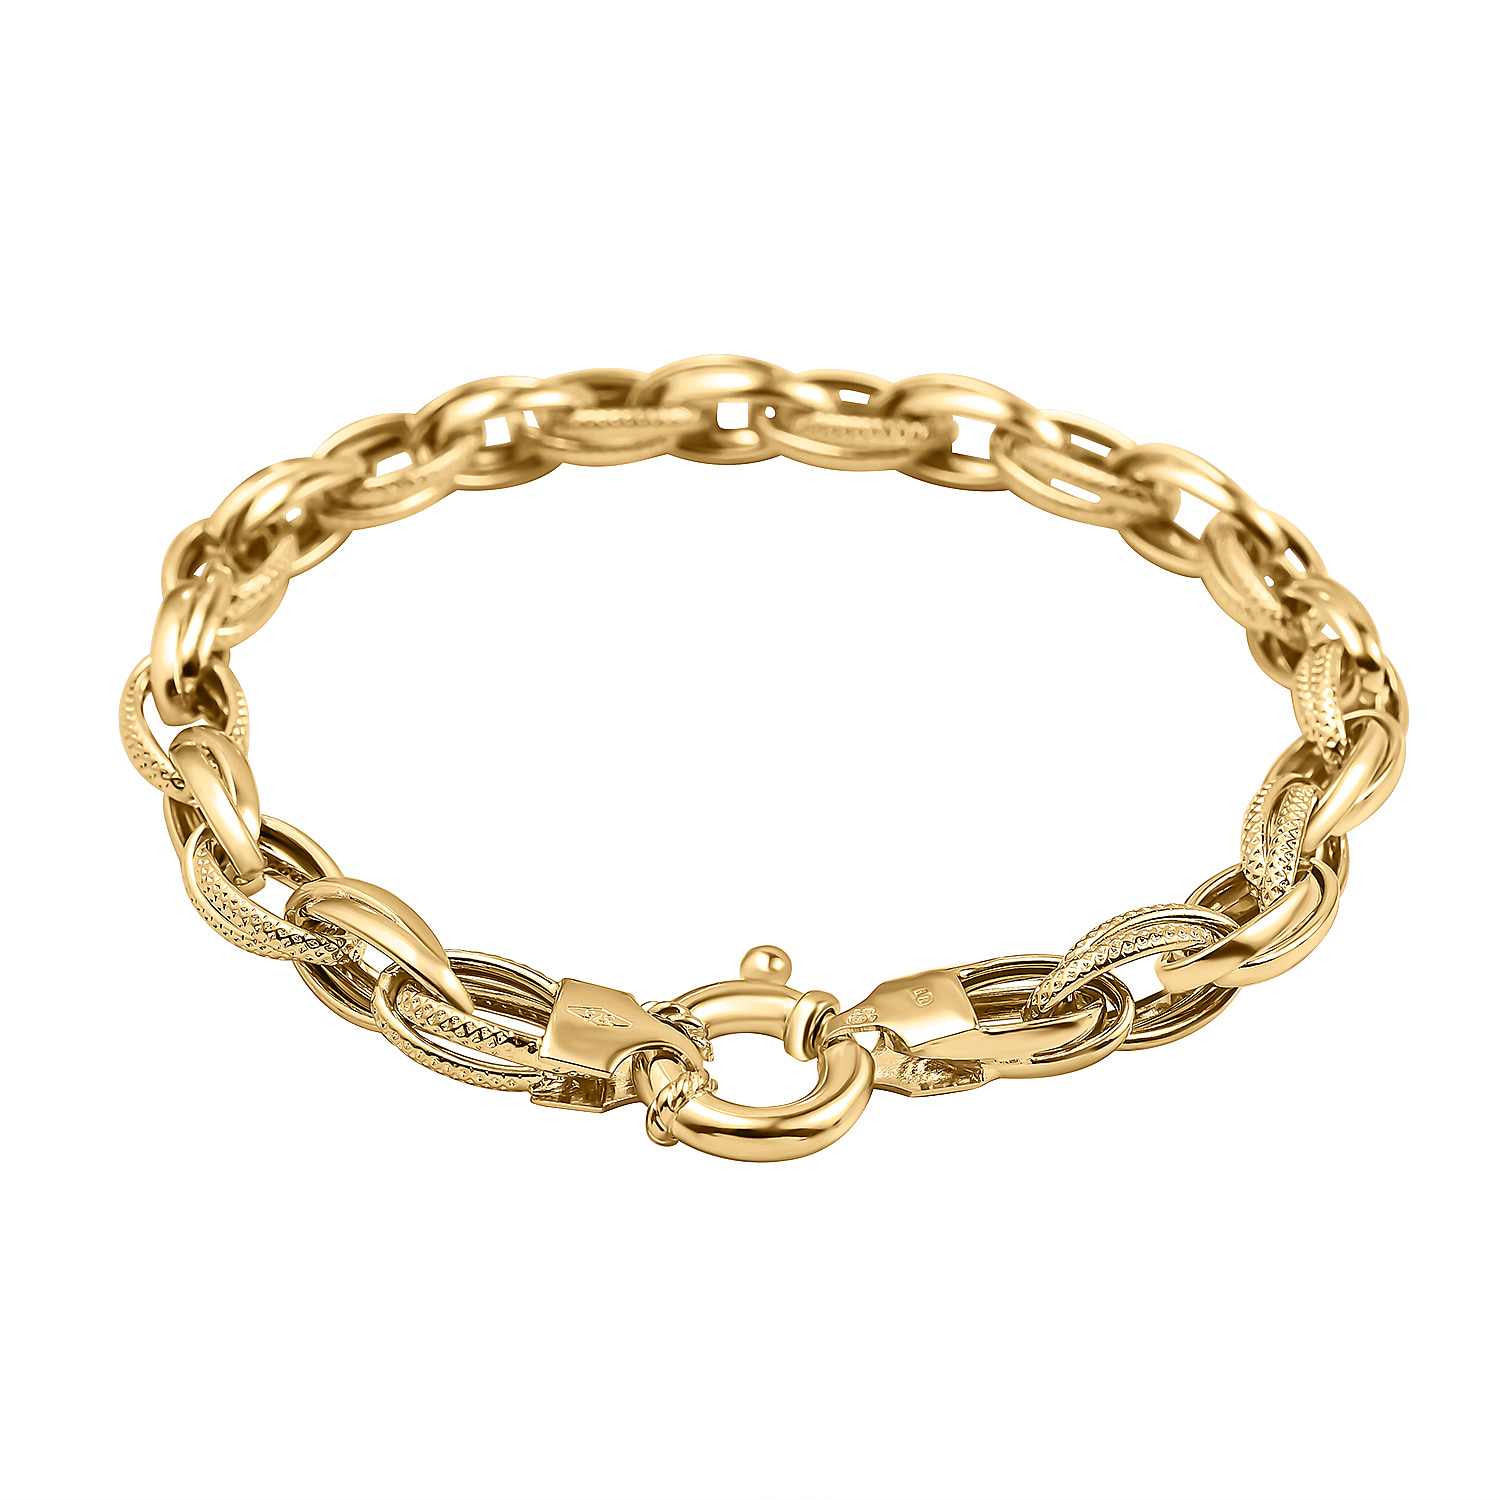 One Time Close Out Deal- 9K Yellow Gold Prince of Wales Bracelet (Size 7.5) with Senorita Clasp, Gold Wt 5.6 Gms.